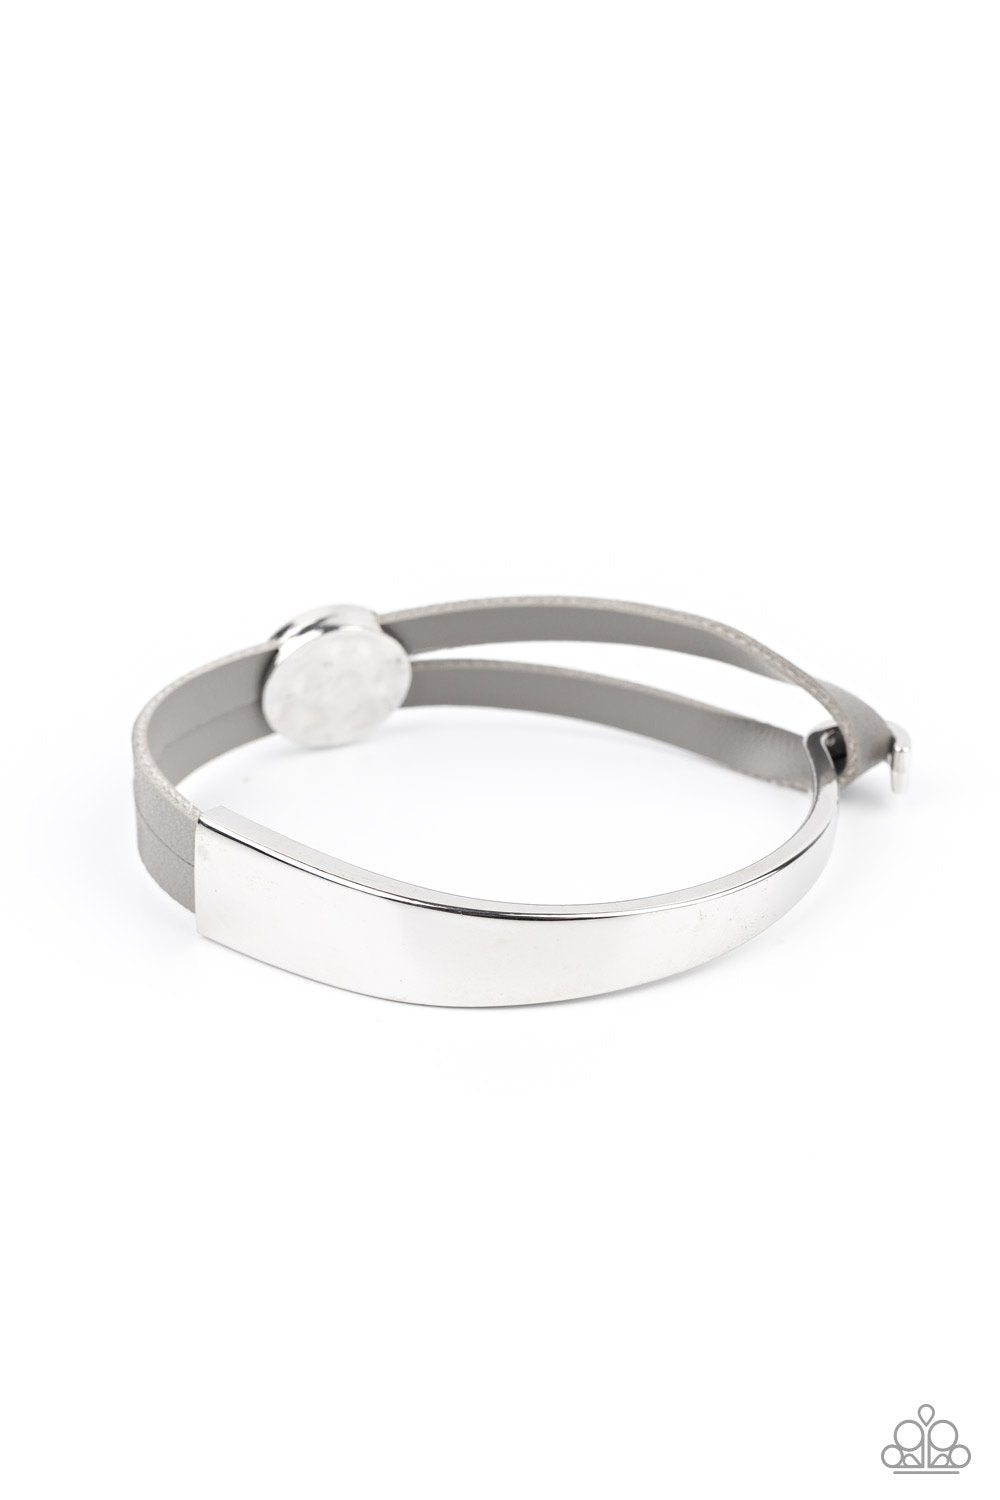 A Notch Above The Rest Silver and Gray Leather Bracelet - Paparazzi Accessories - lightbox -CarasShop.com - $5 Jewelry by Cara Jewels